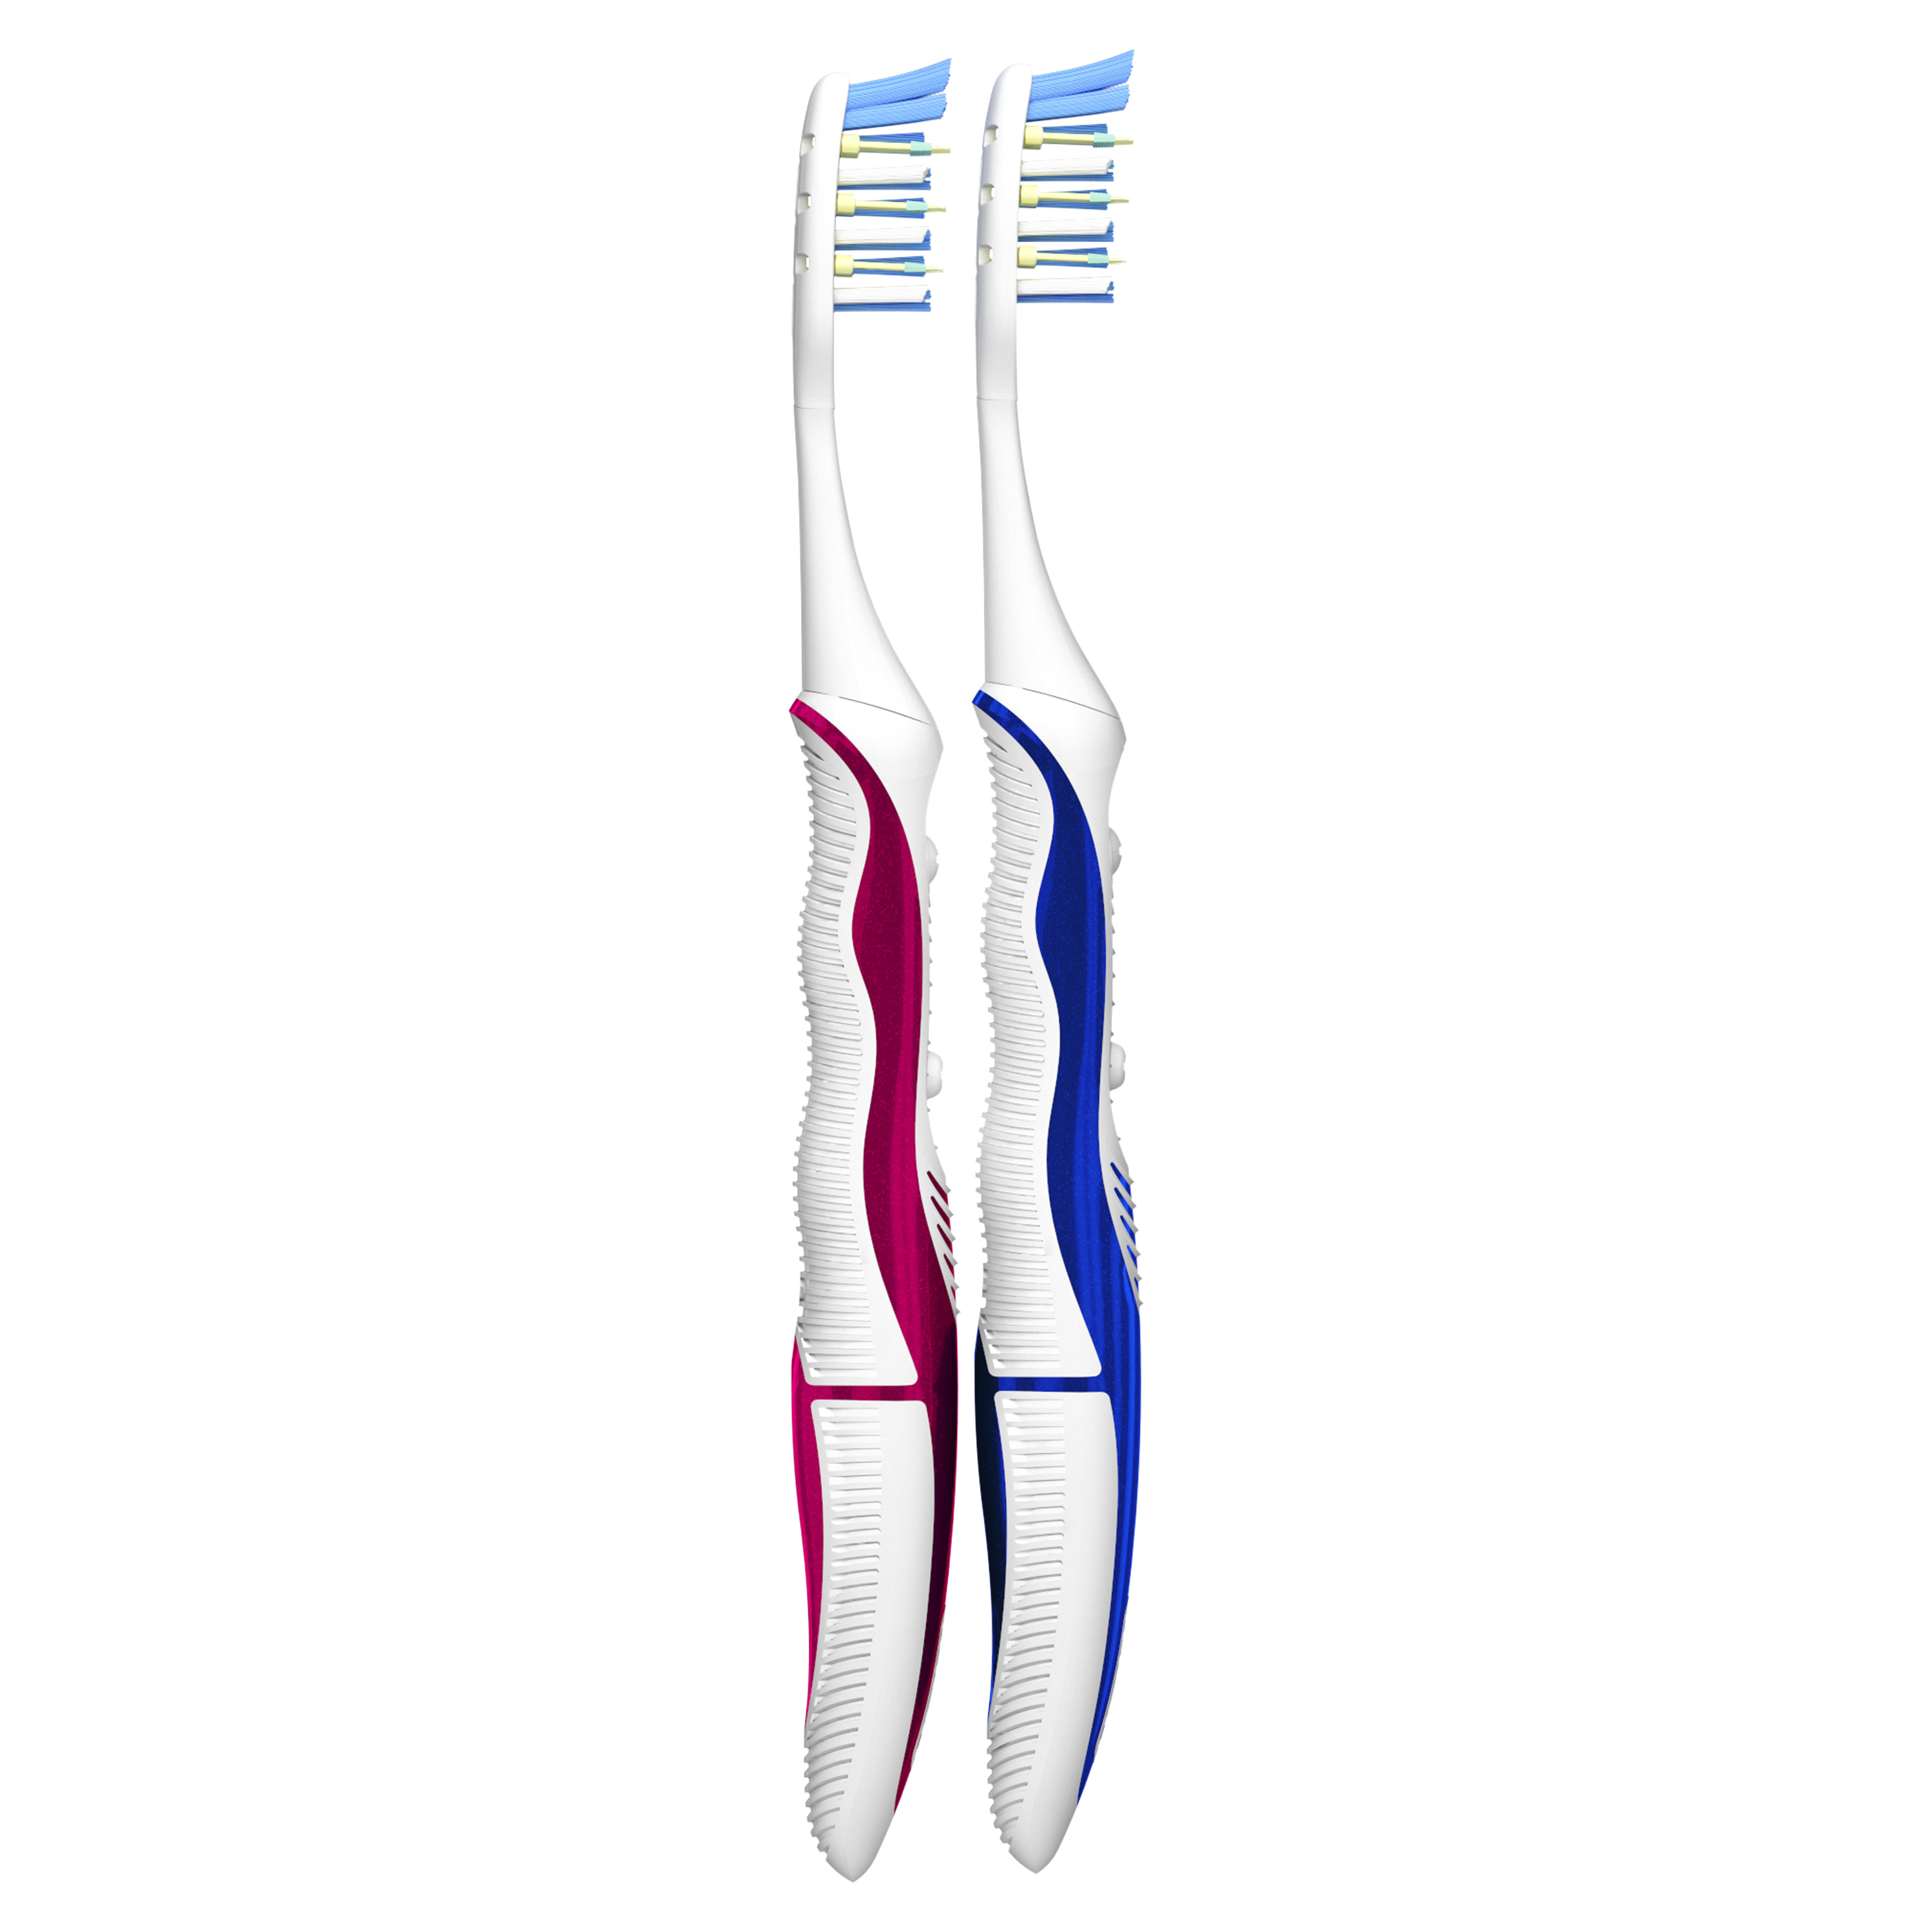 Oral-B Pulsar Whitening Battery Electric Toothbrush, Soft, 2 Ct - image 3 of 9